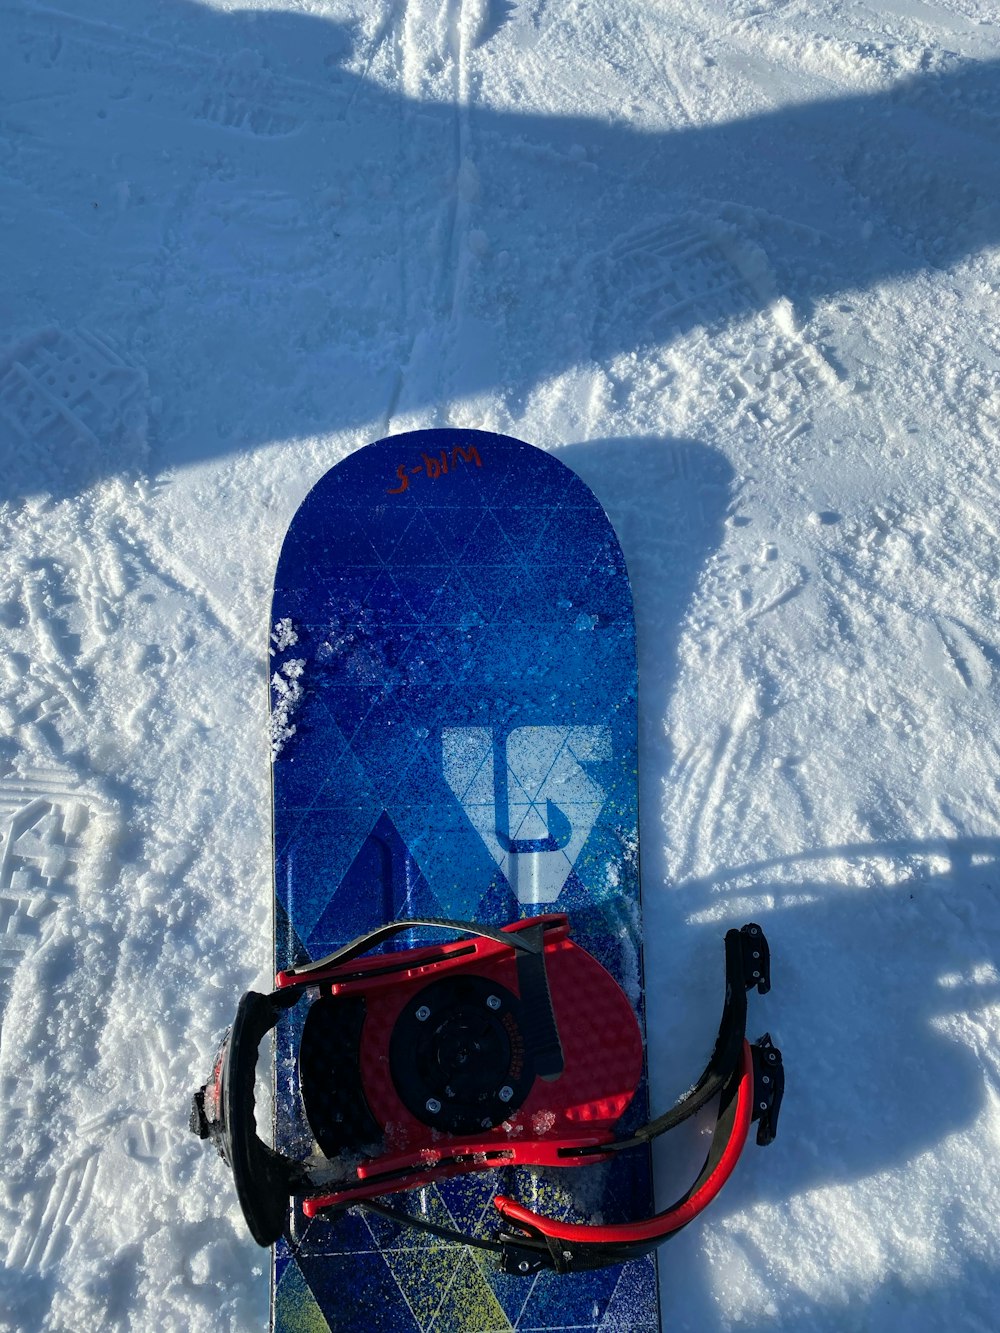 red and black snow sled on snow covered ground